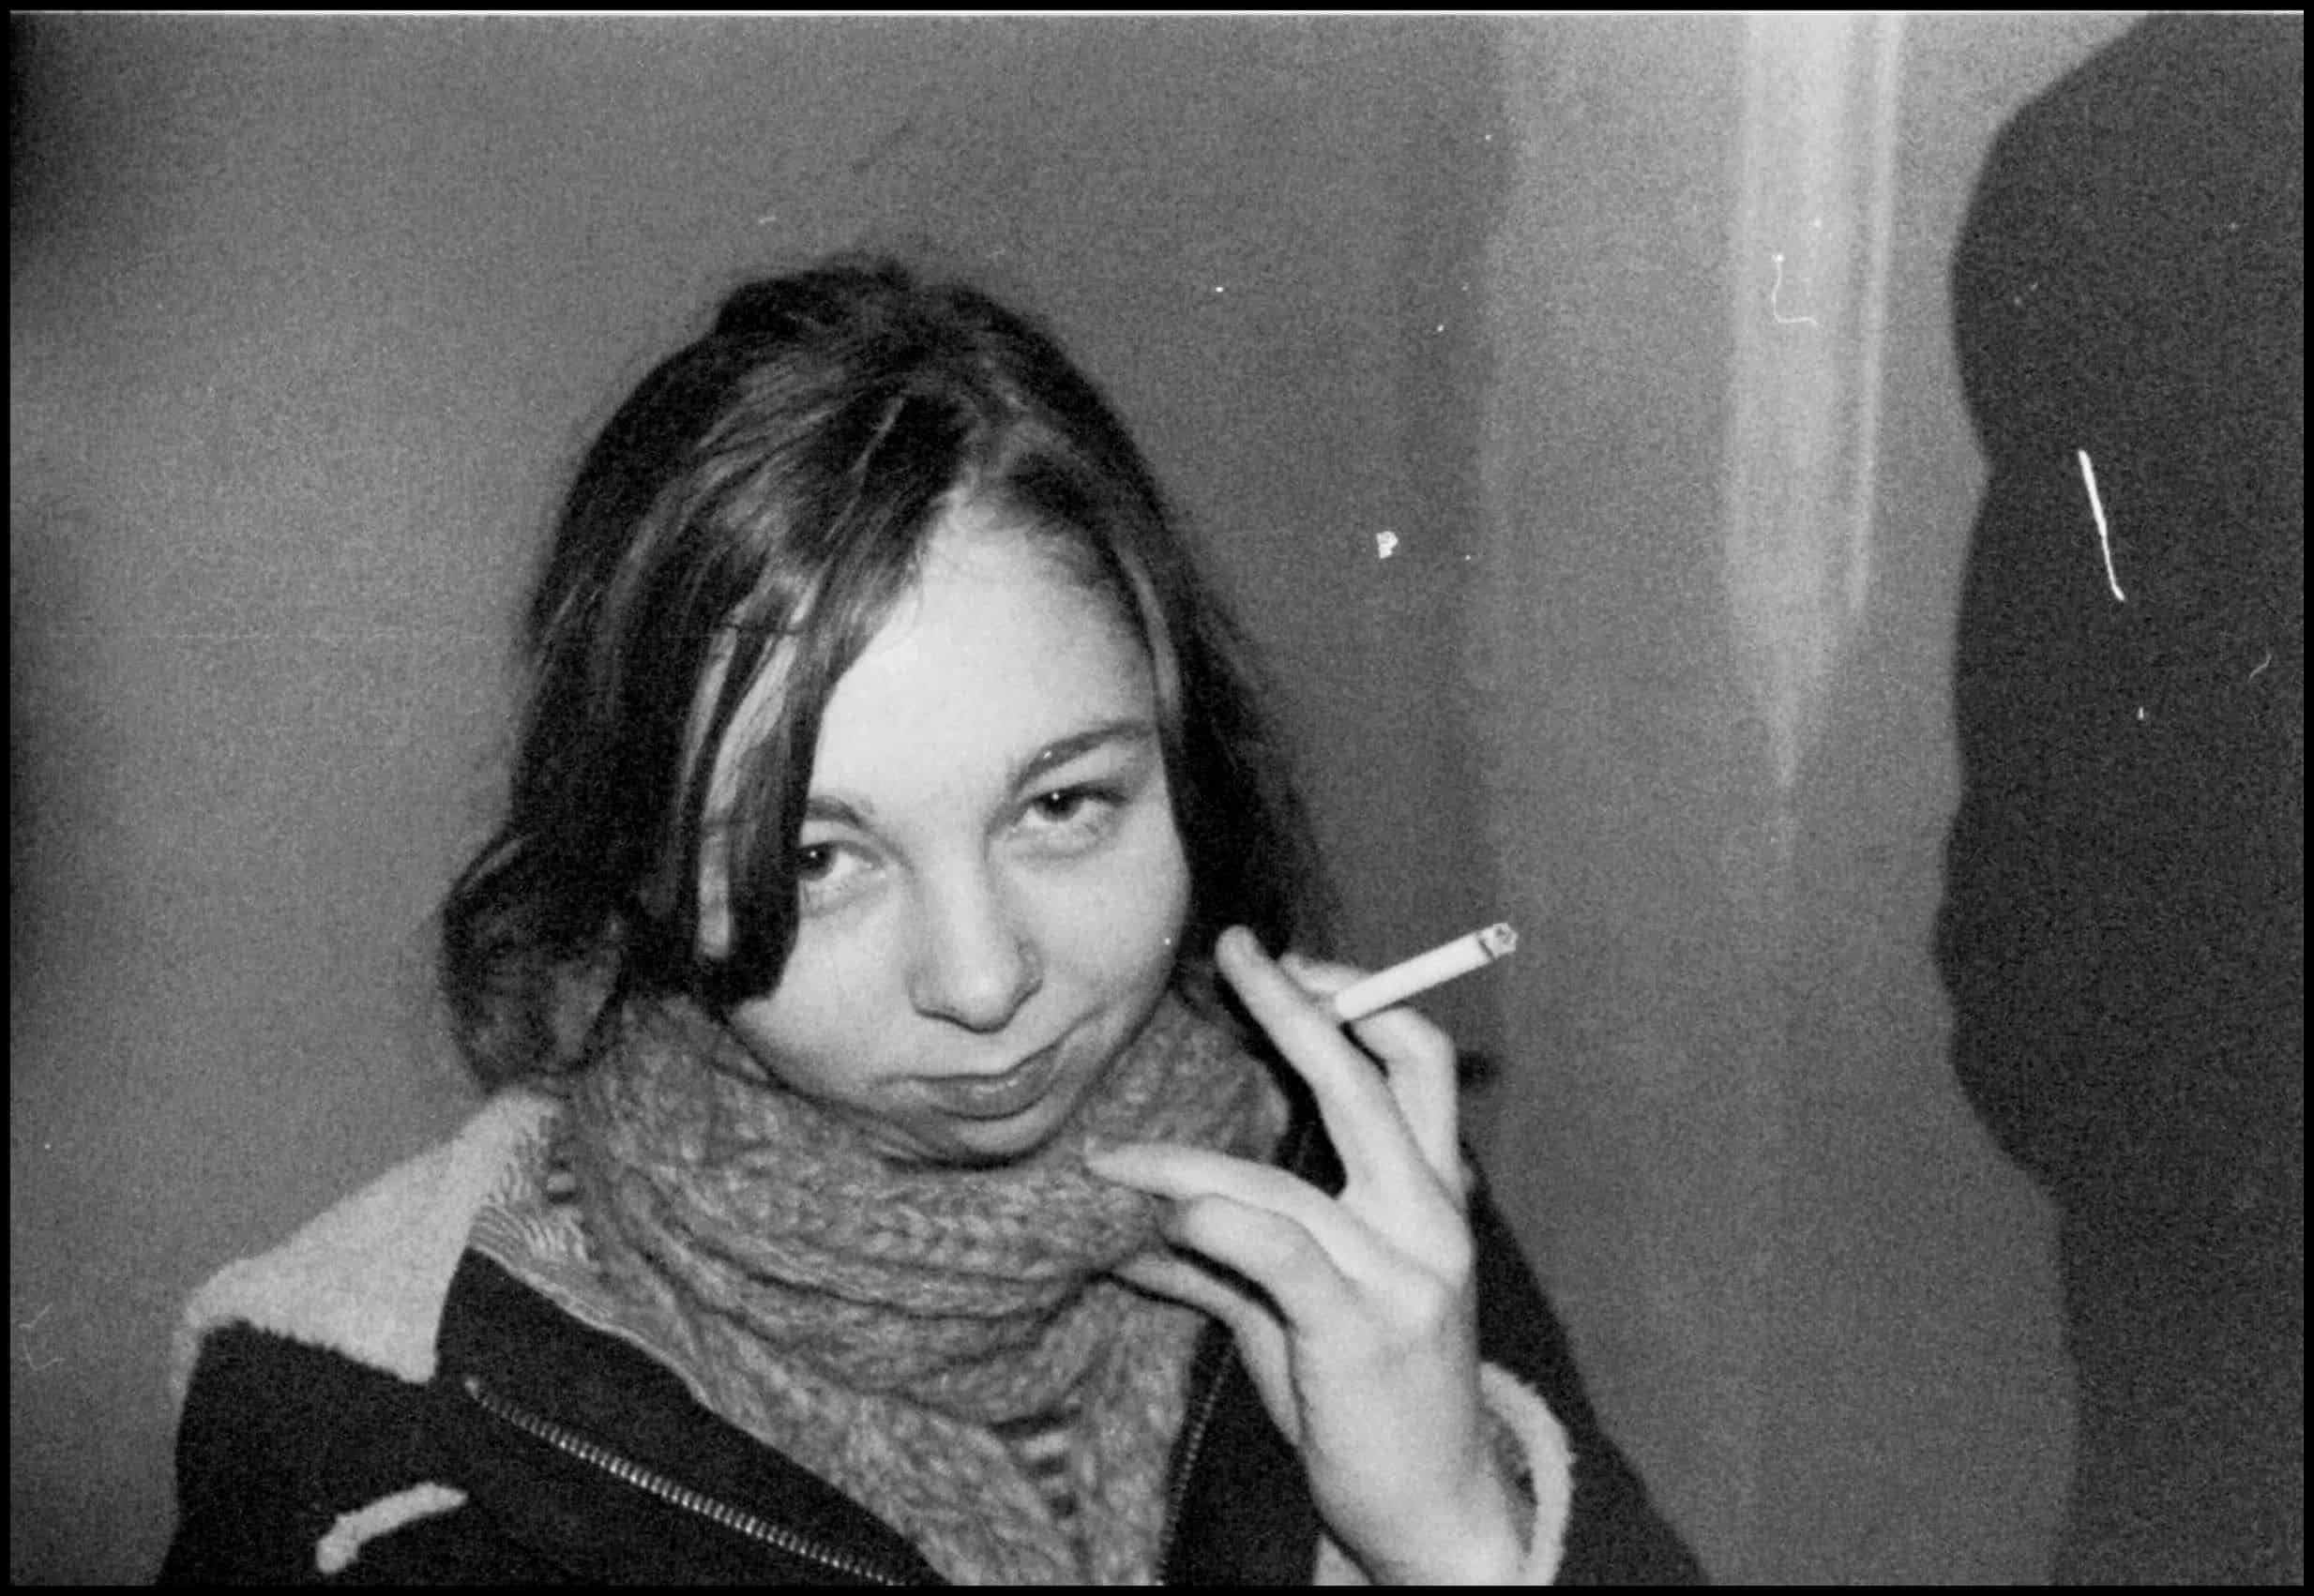 whitney with cigarette